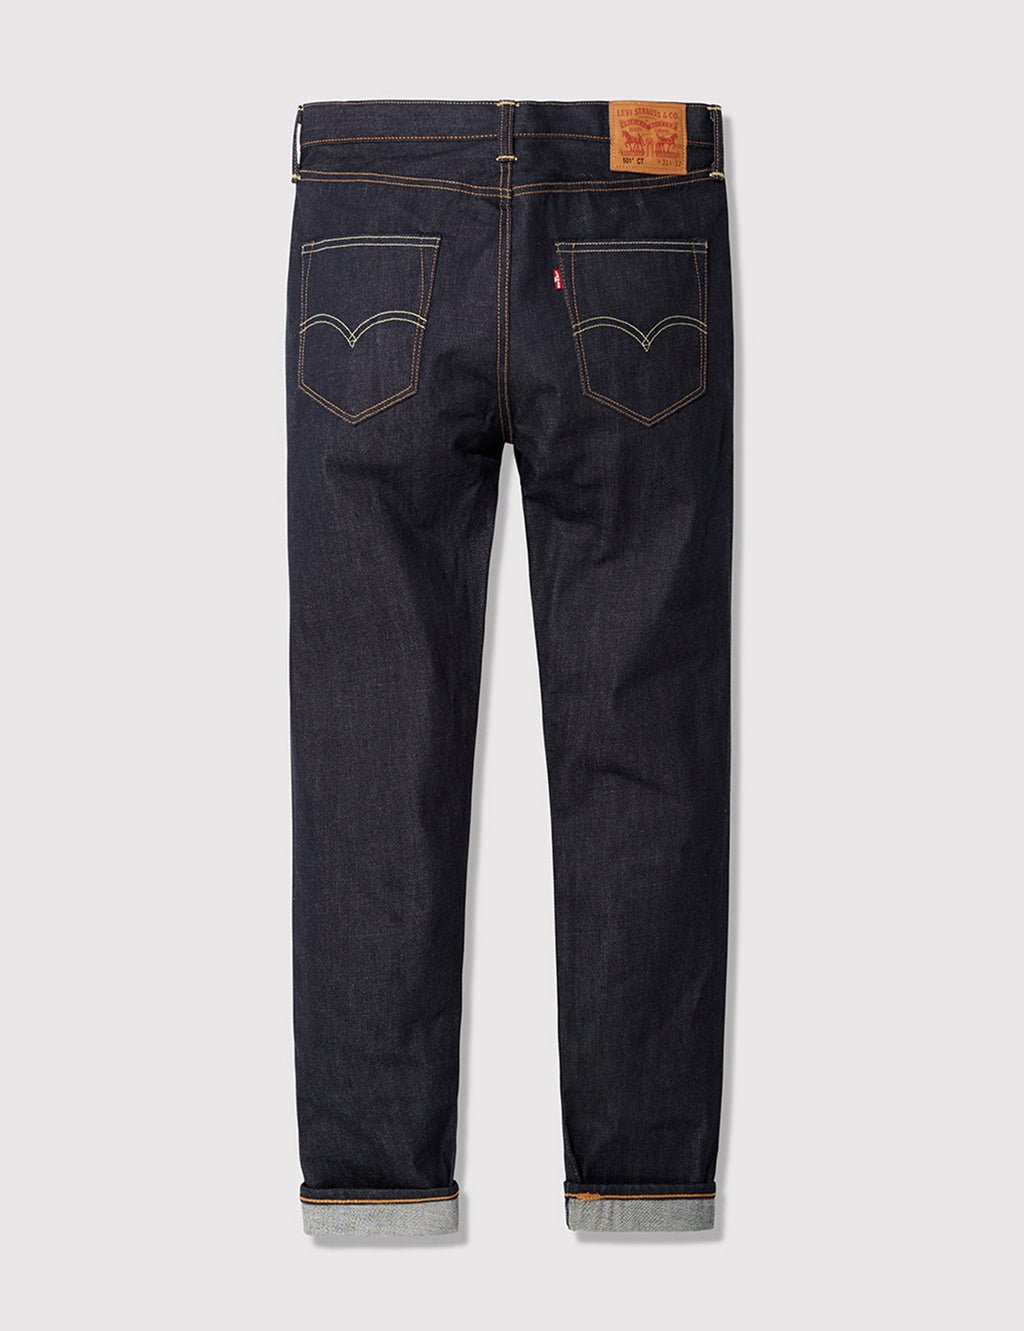 Levis 501 CT Customised Tapered Jeans - Long Day Rigid Blue | URBAN EXCESS.